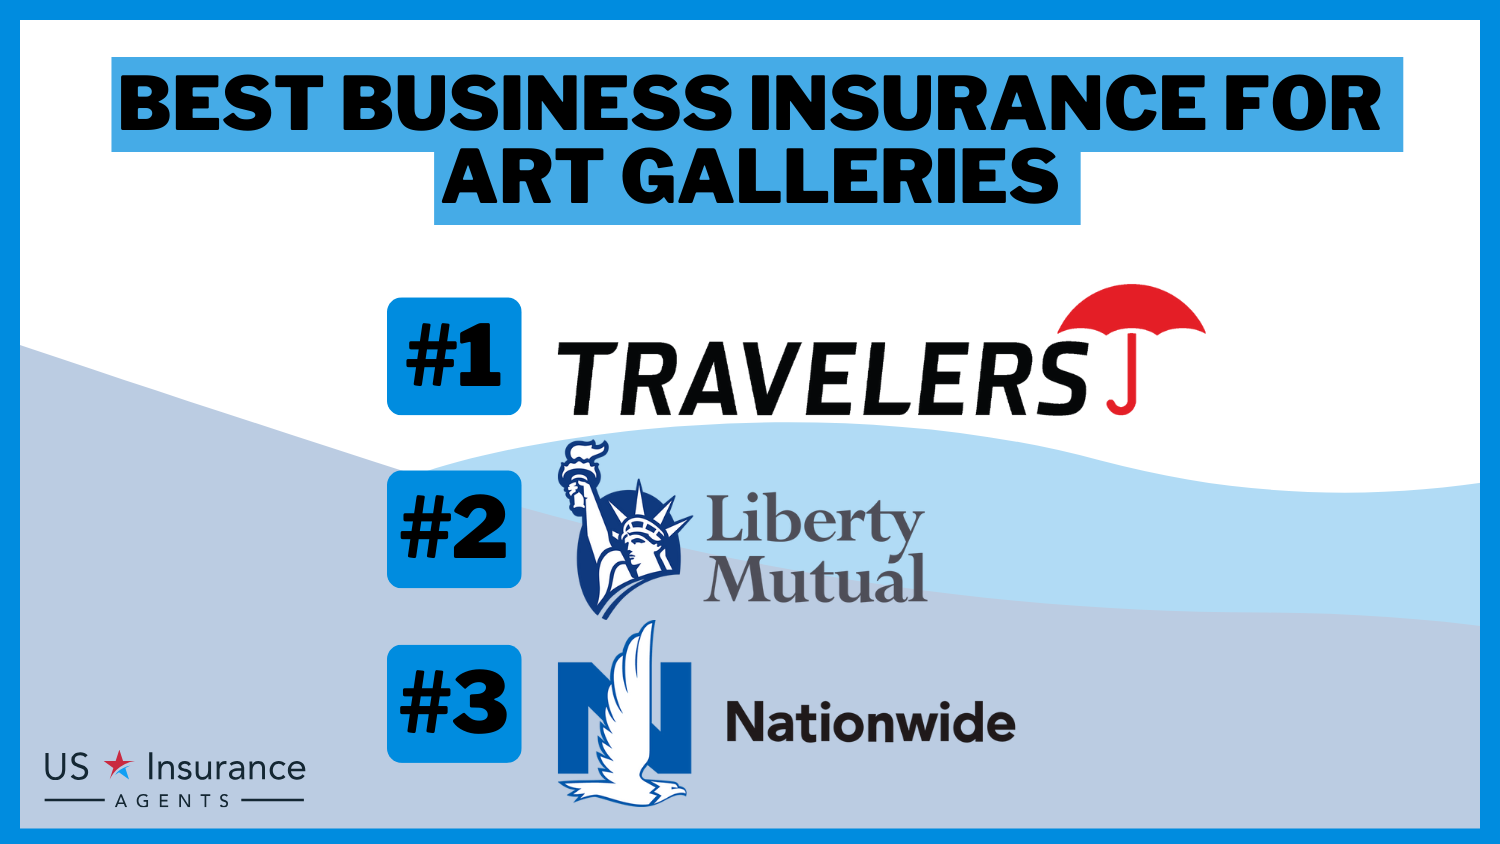 Travelers, Liberty Mutual and Nationwide: Best Business Insurance for Art Galleries